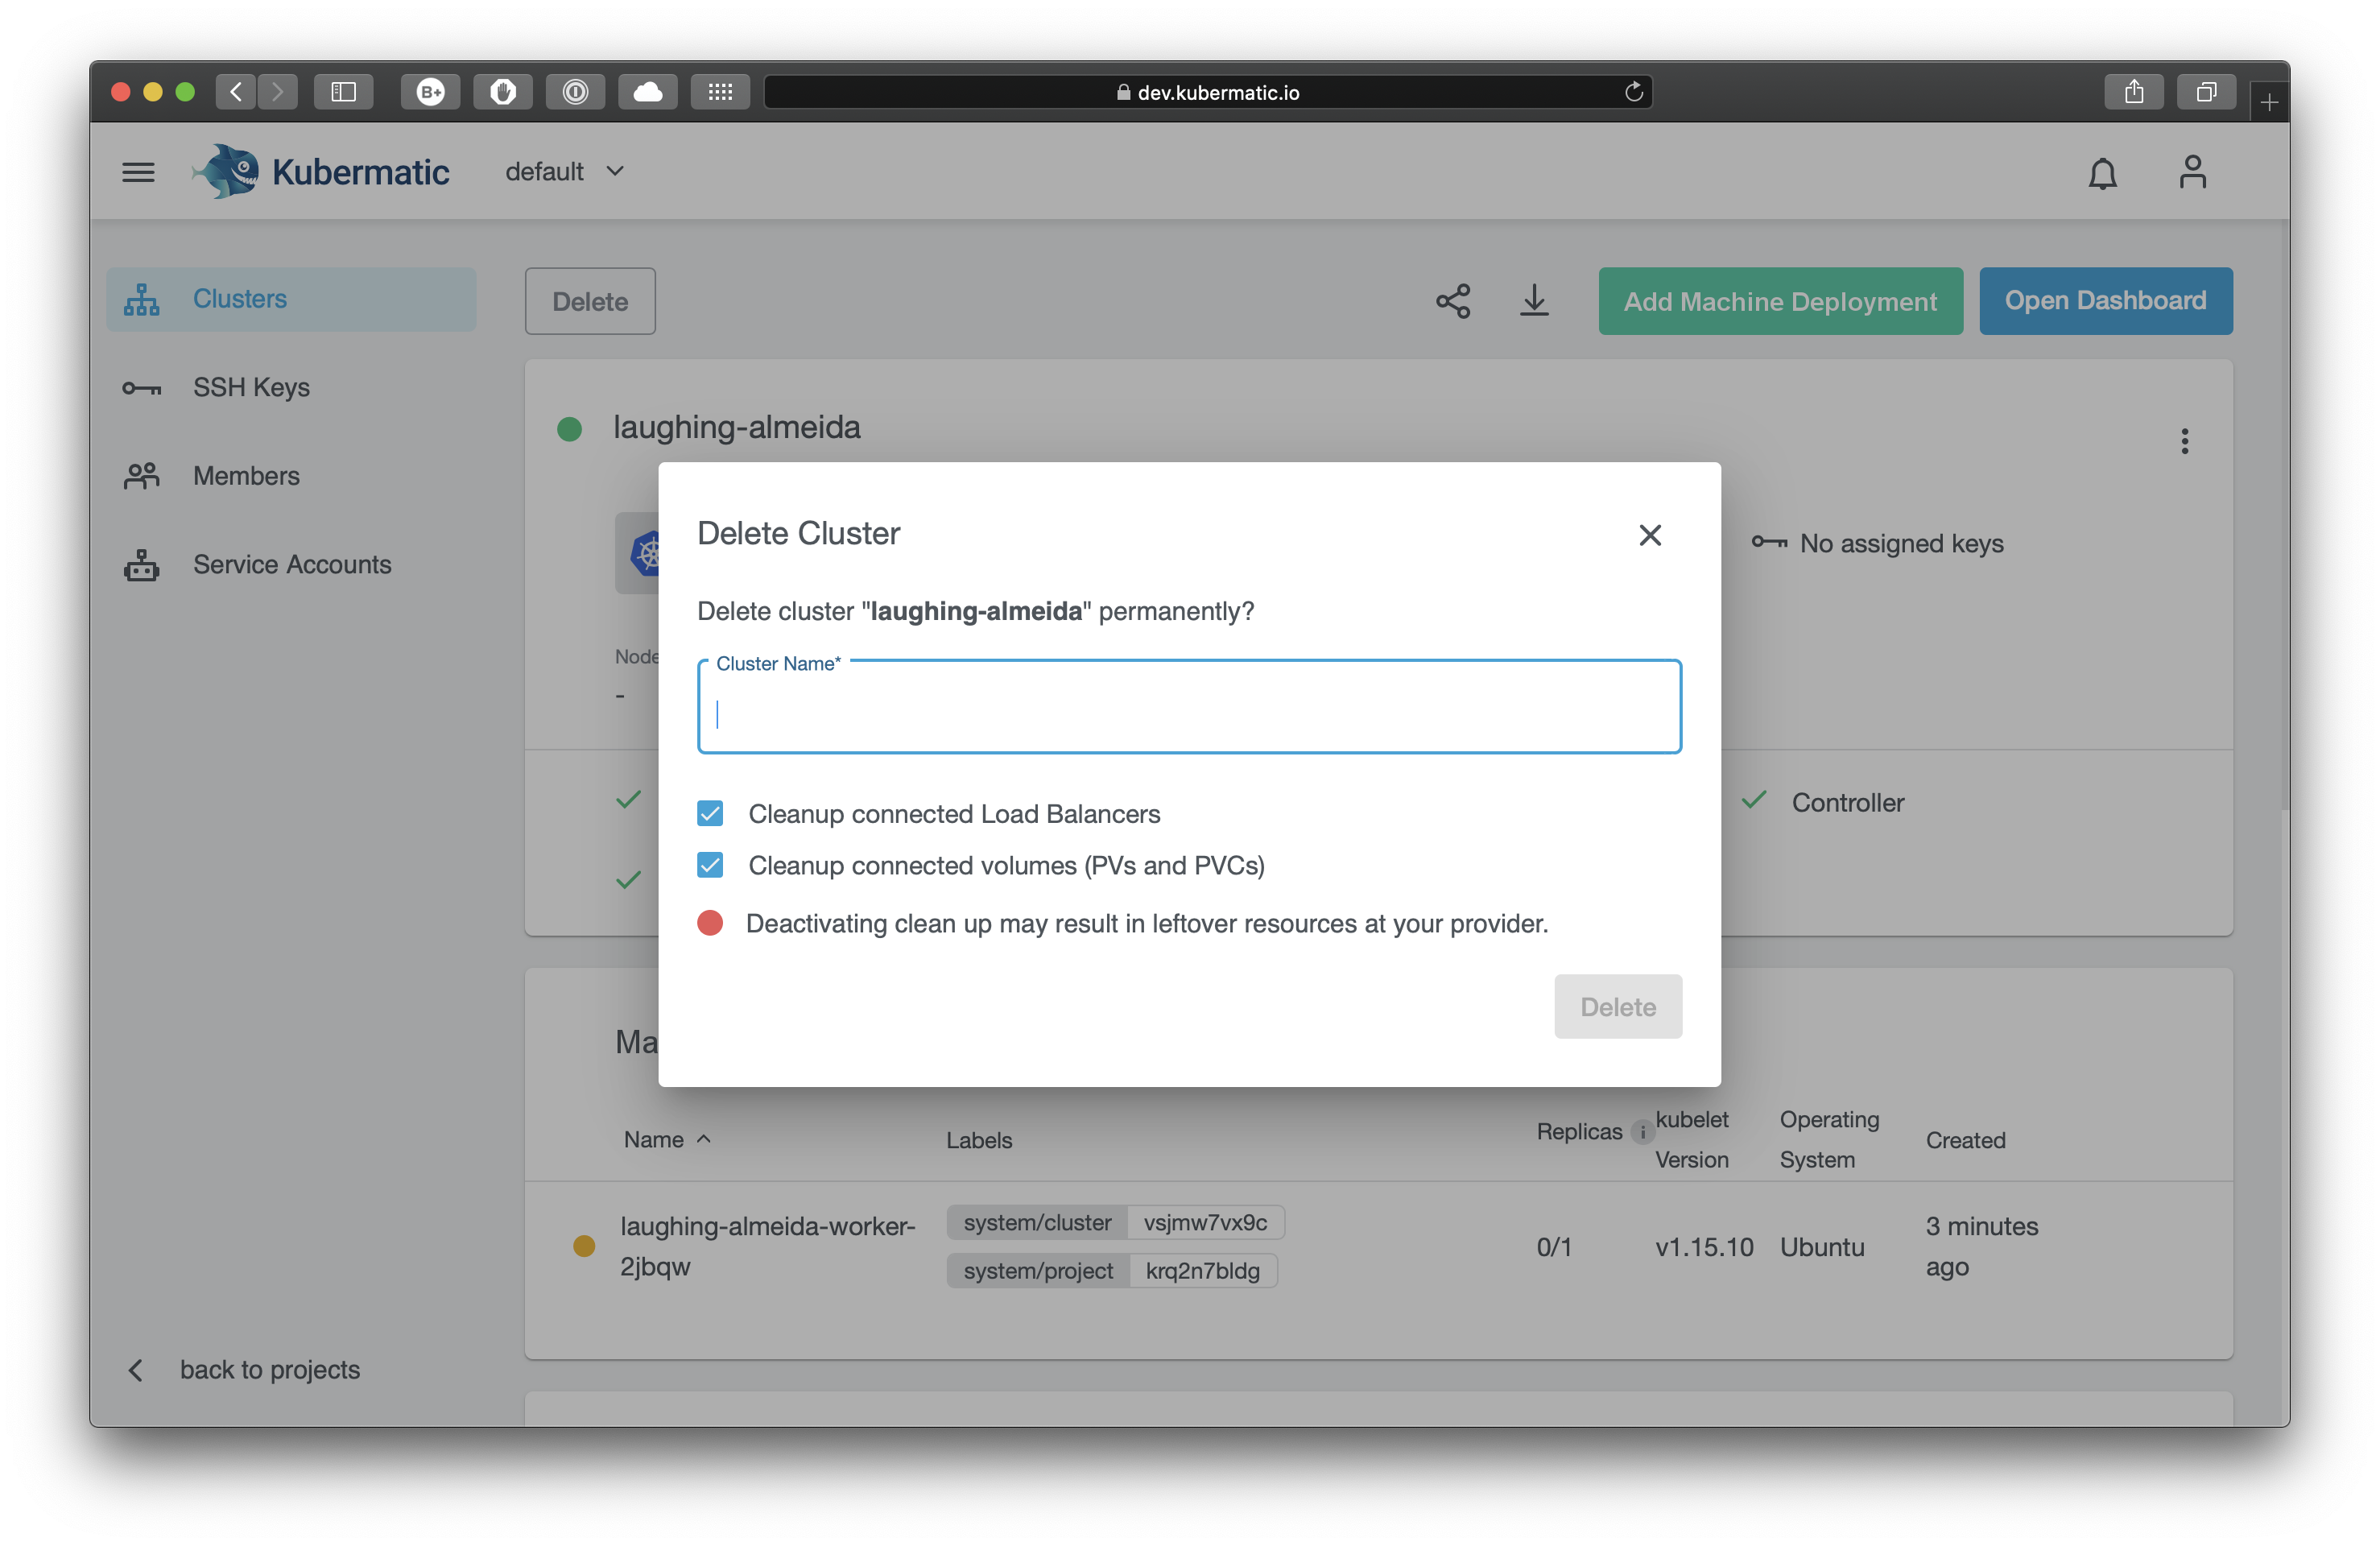 Confirmation dialog for the cluster deletion